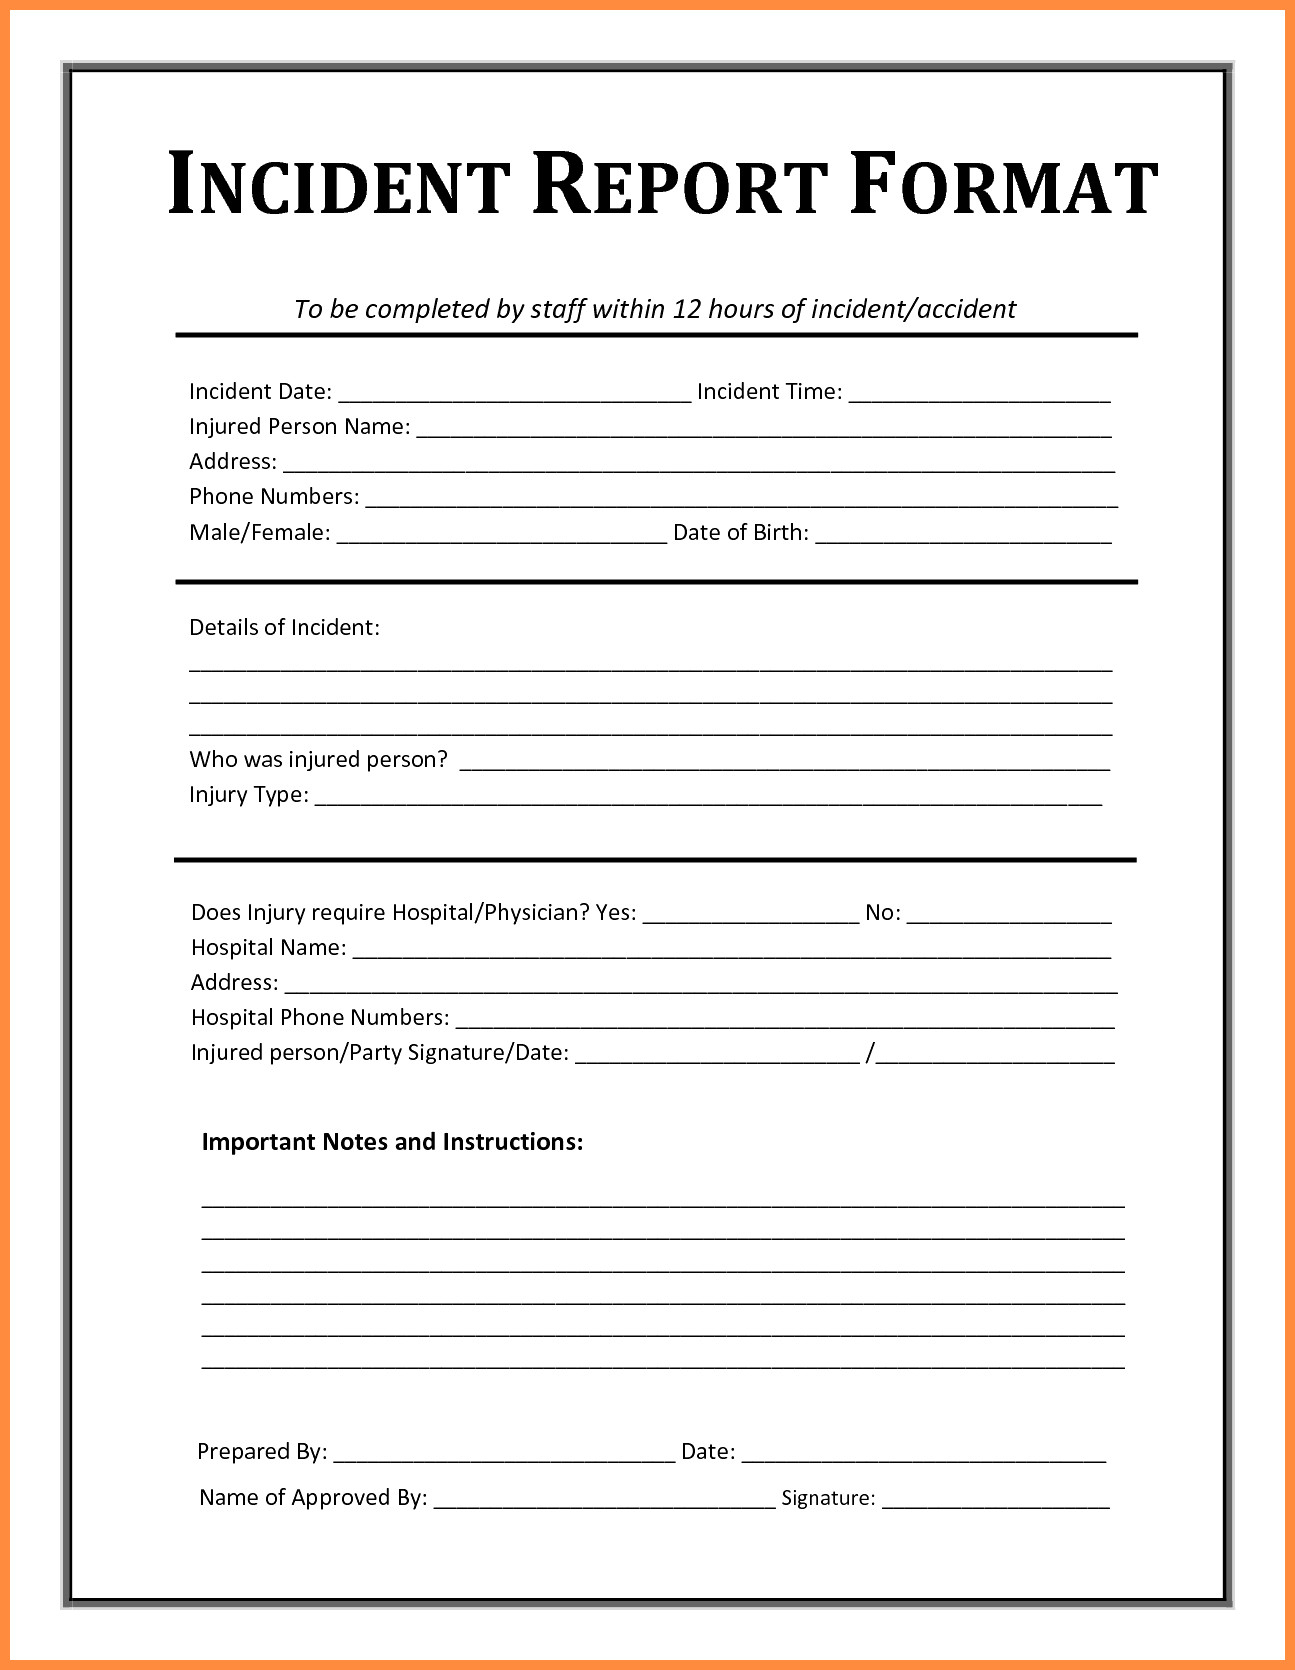 Incident Report Sample Format For School Letter Lost Phone Within Sample Fire Investigation Report Template